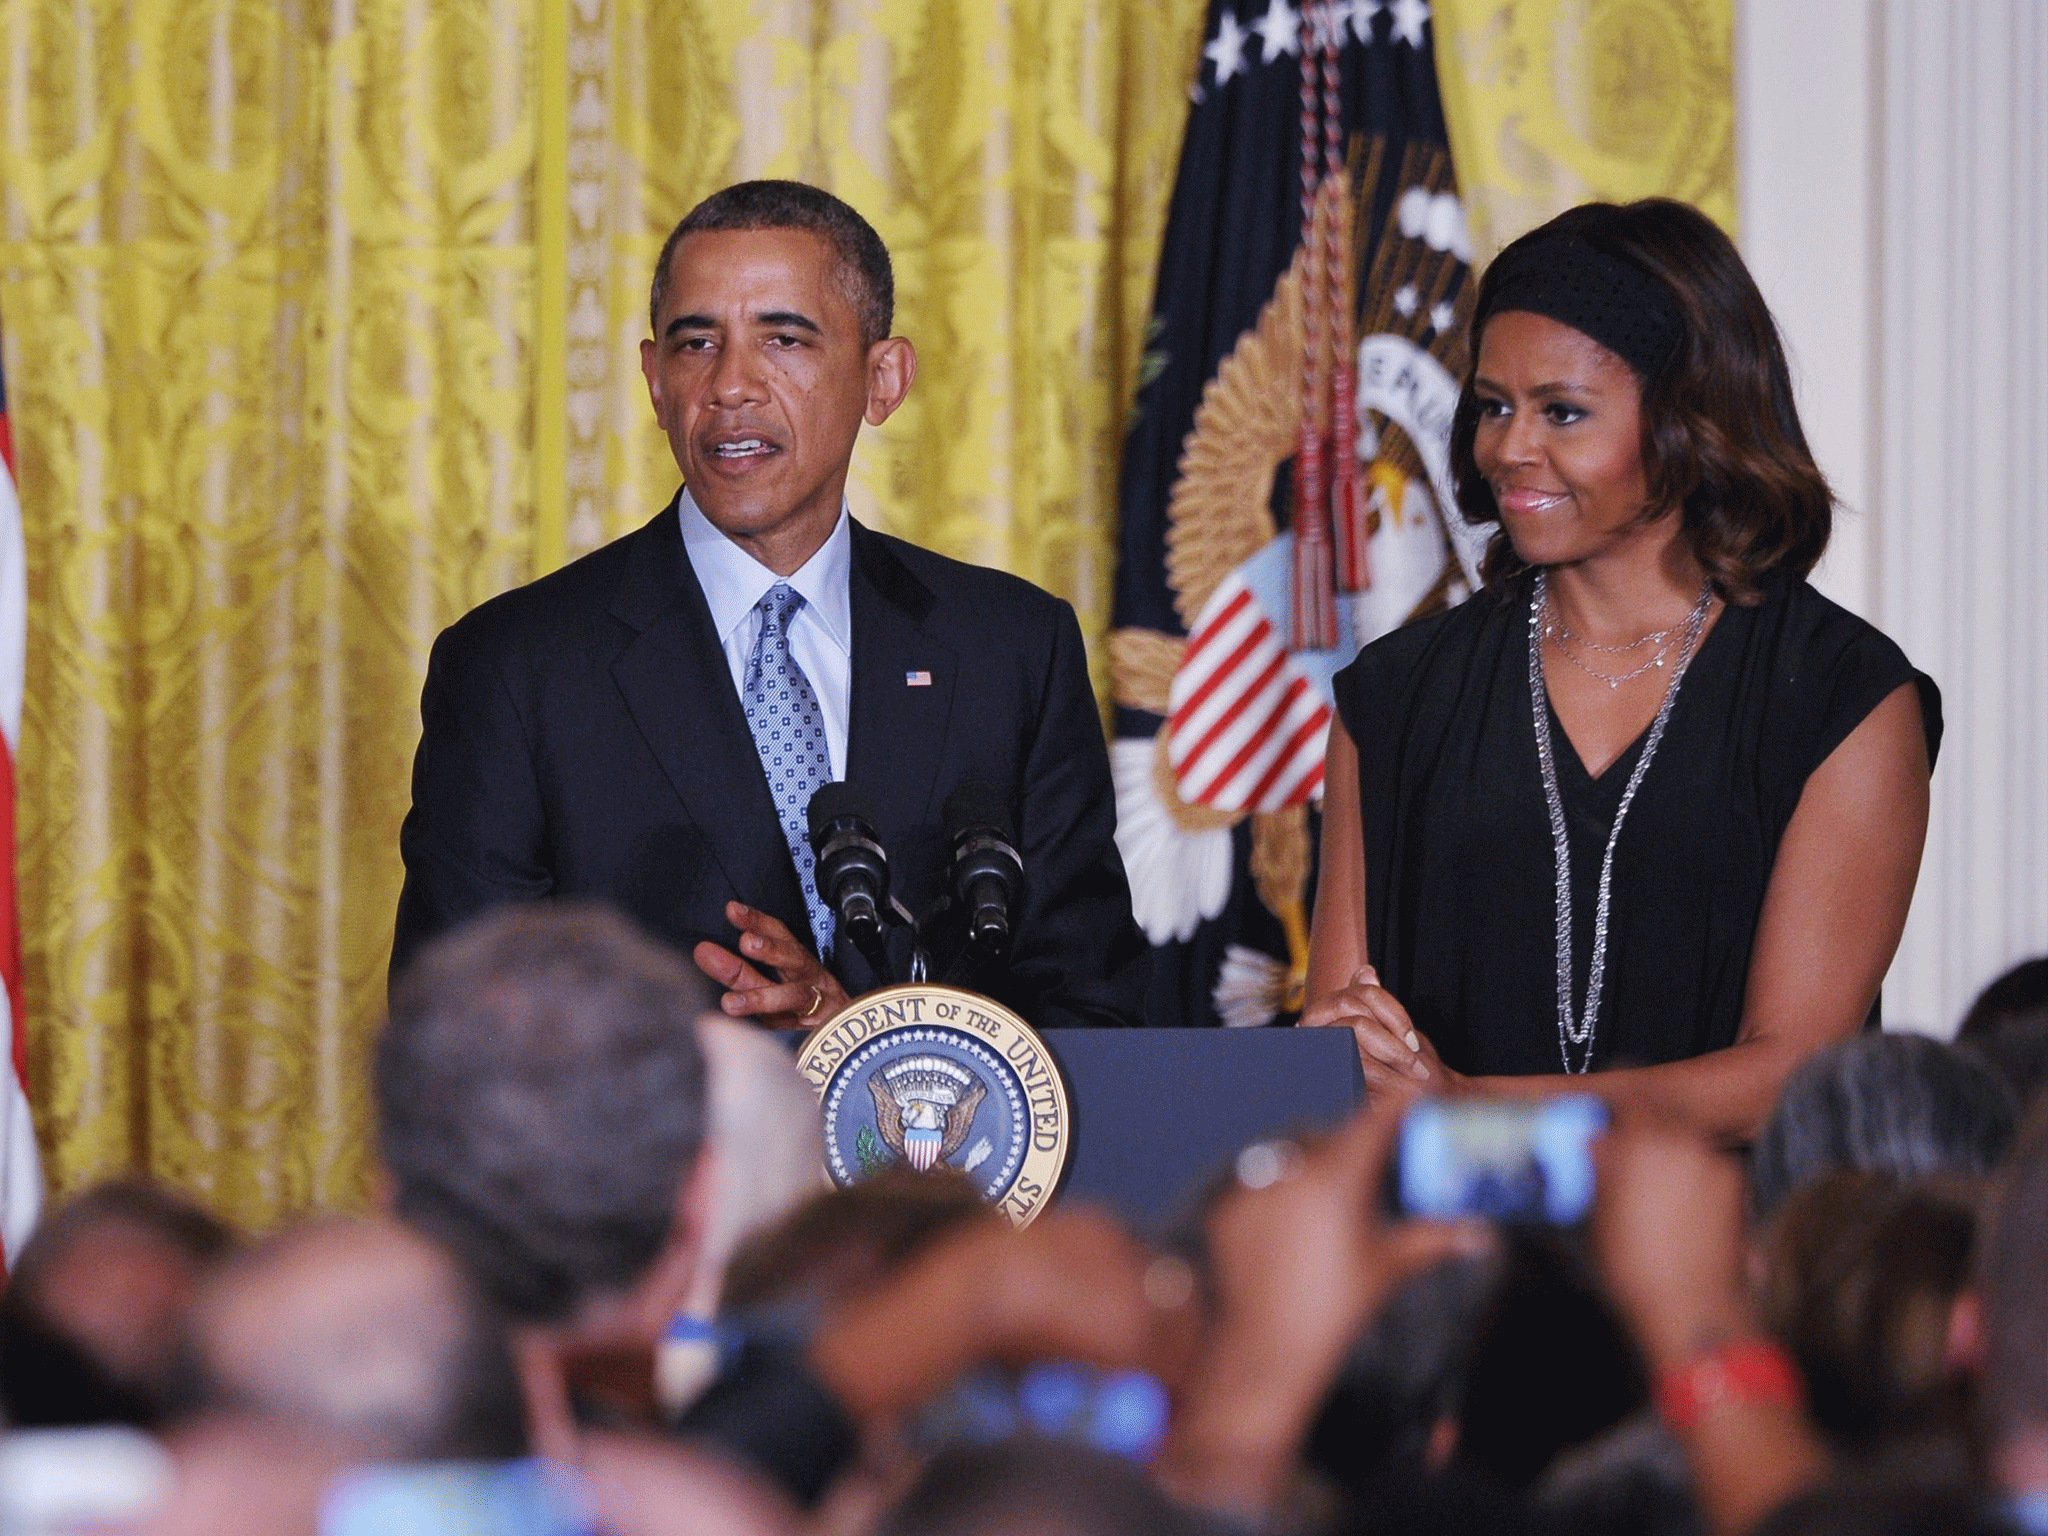 US President Barack Obama speaks during a reception celebrating LGBT Pride Month as First Lady Michelle Obama watches on June 30, 2014 in the East Room of the White House in Washington, DC